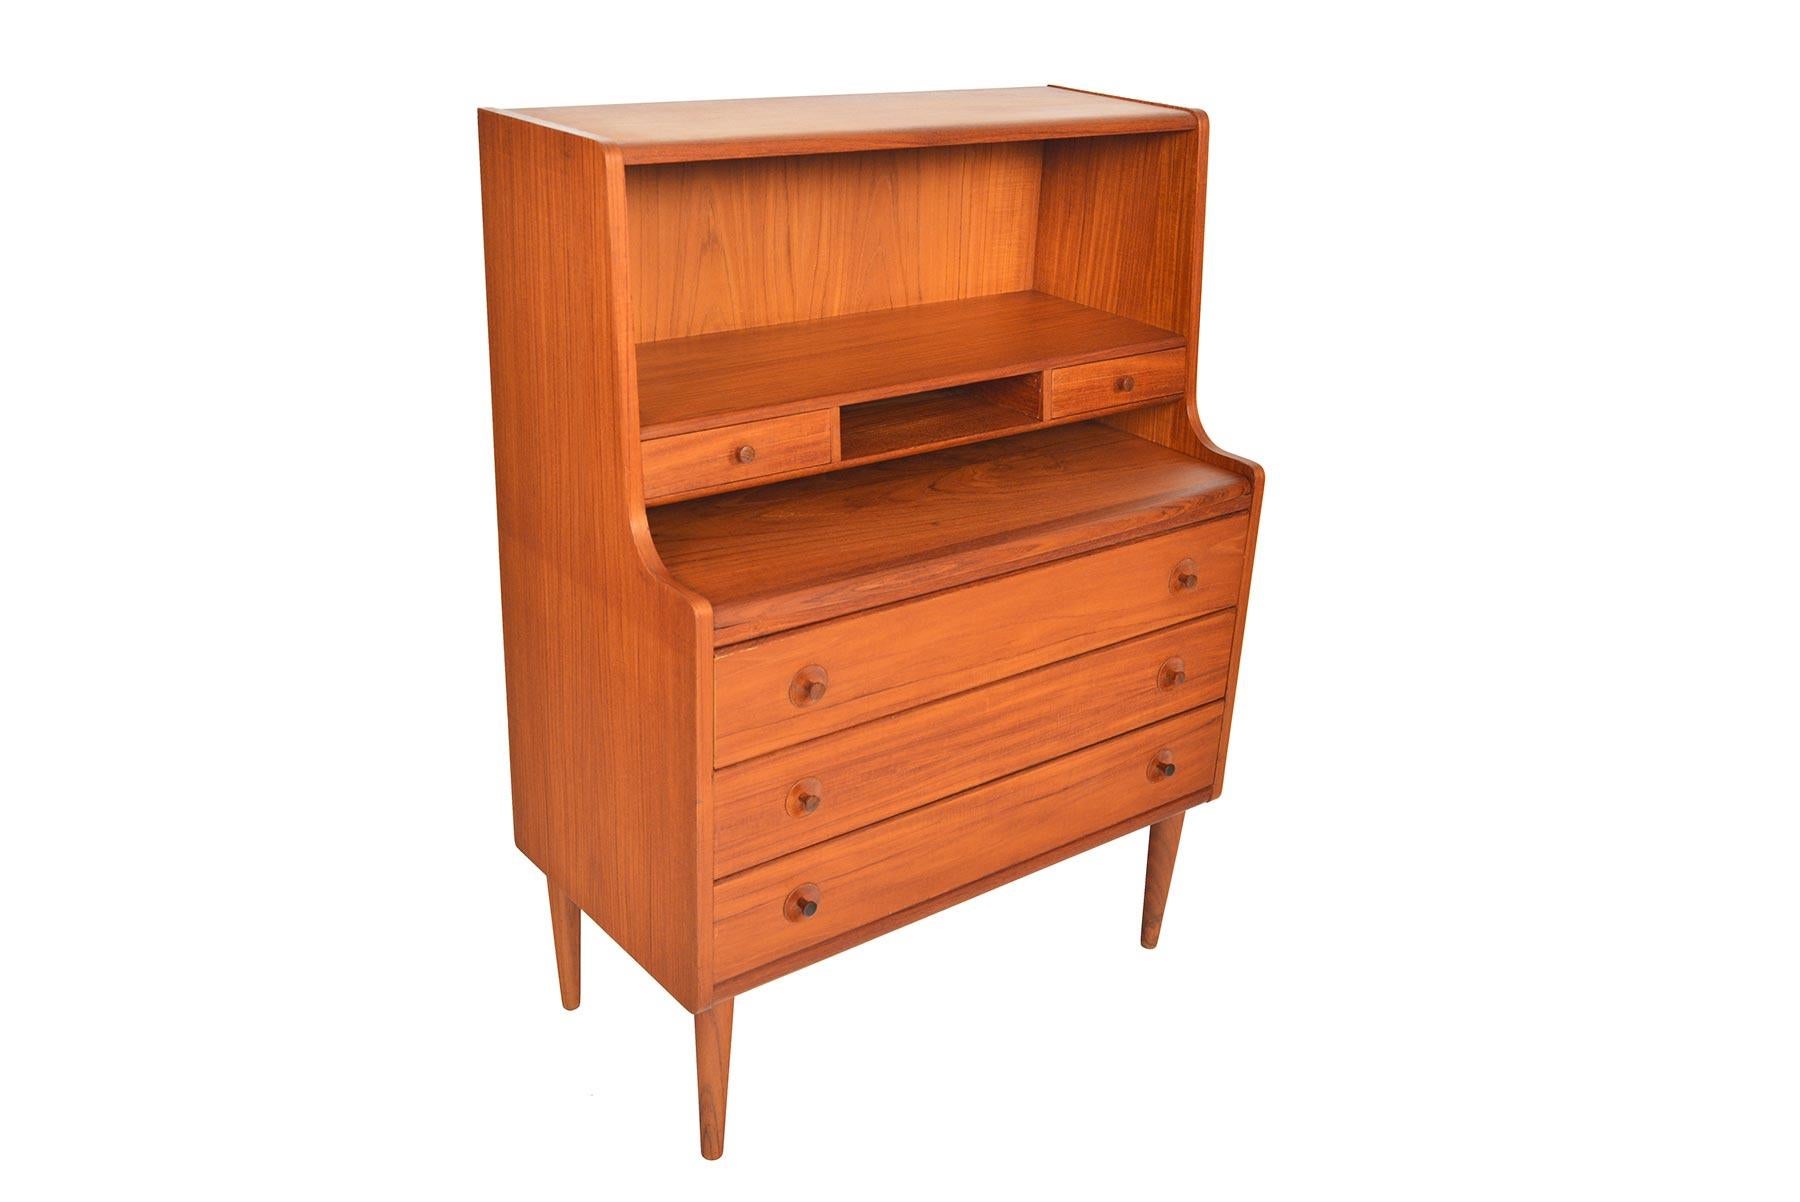 This incredible Danish modern secretary desk in teak hails straight from the 1960s! The center of this piece features a pullout desk and provides a spacious work surface. Two small upper drawers and three large, lower drawers offer the perfect